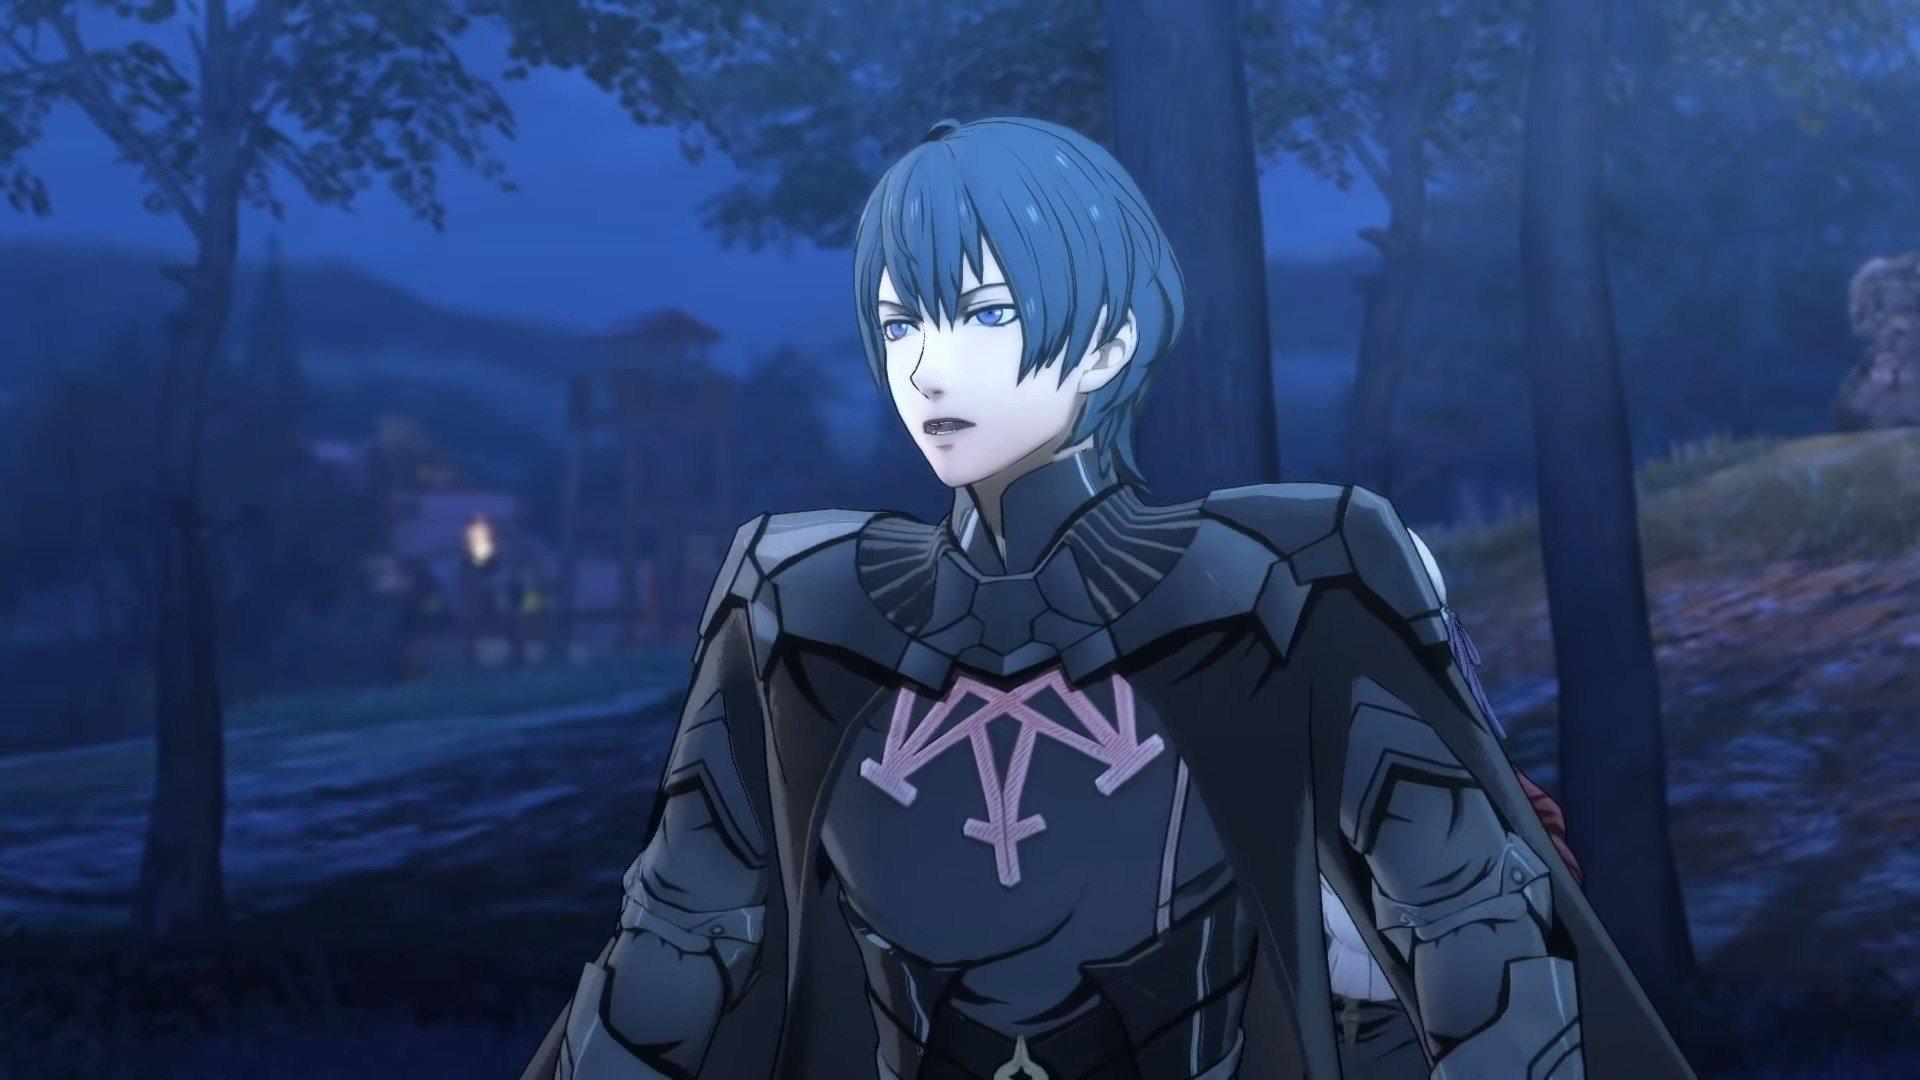 Buy Fire Emblem: Three Houses On Switch And Receive Byleth In Fire